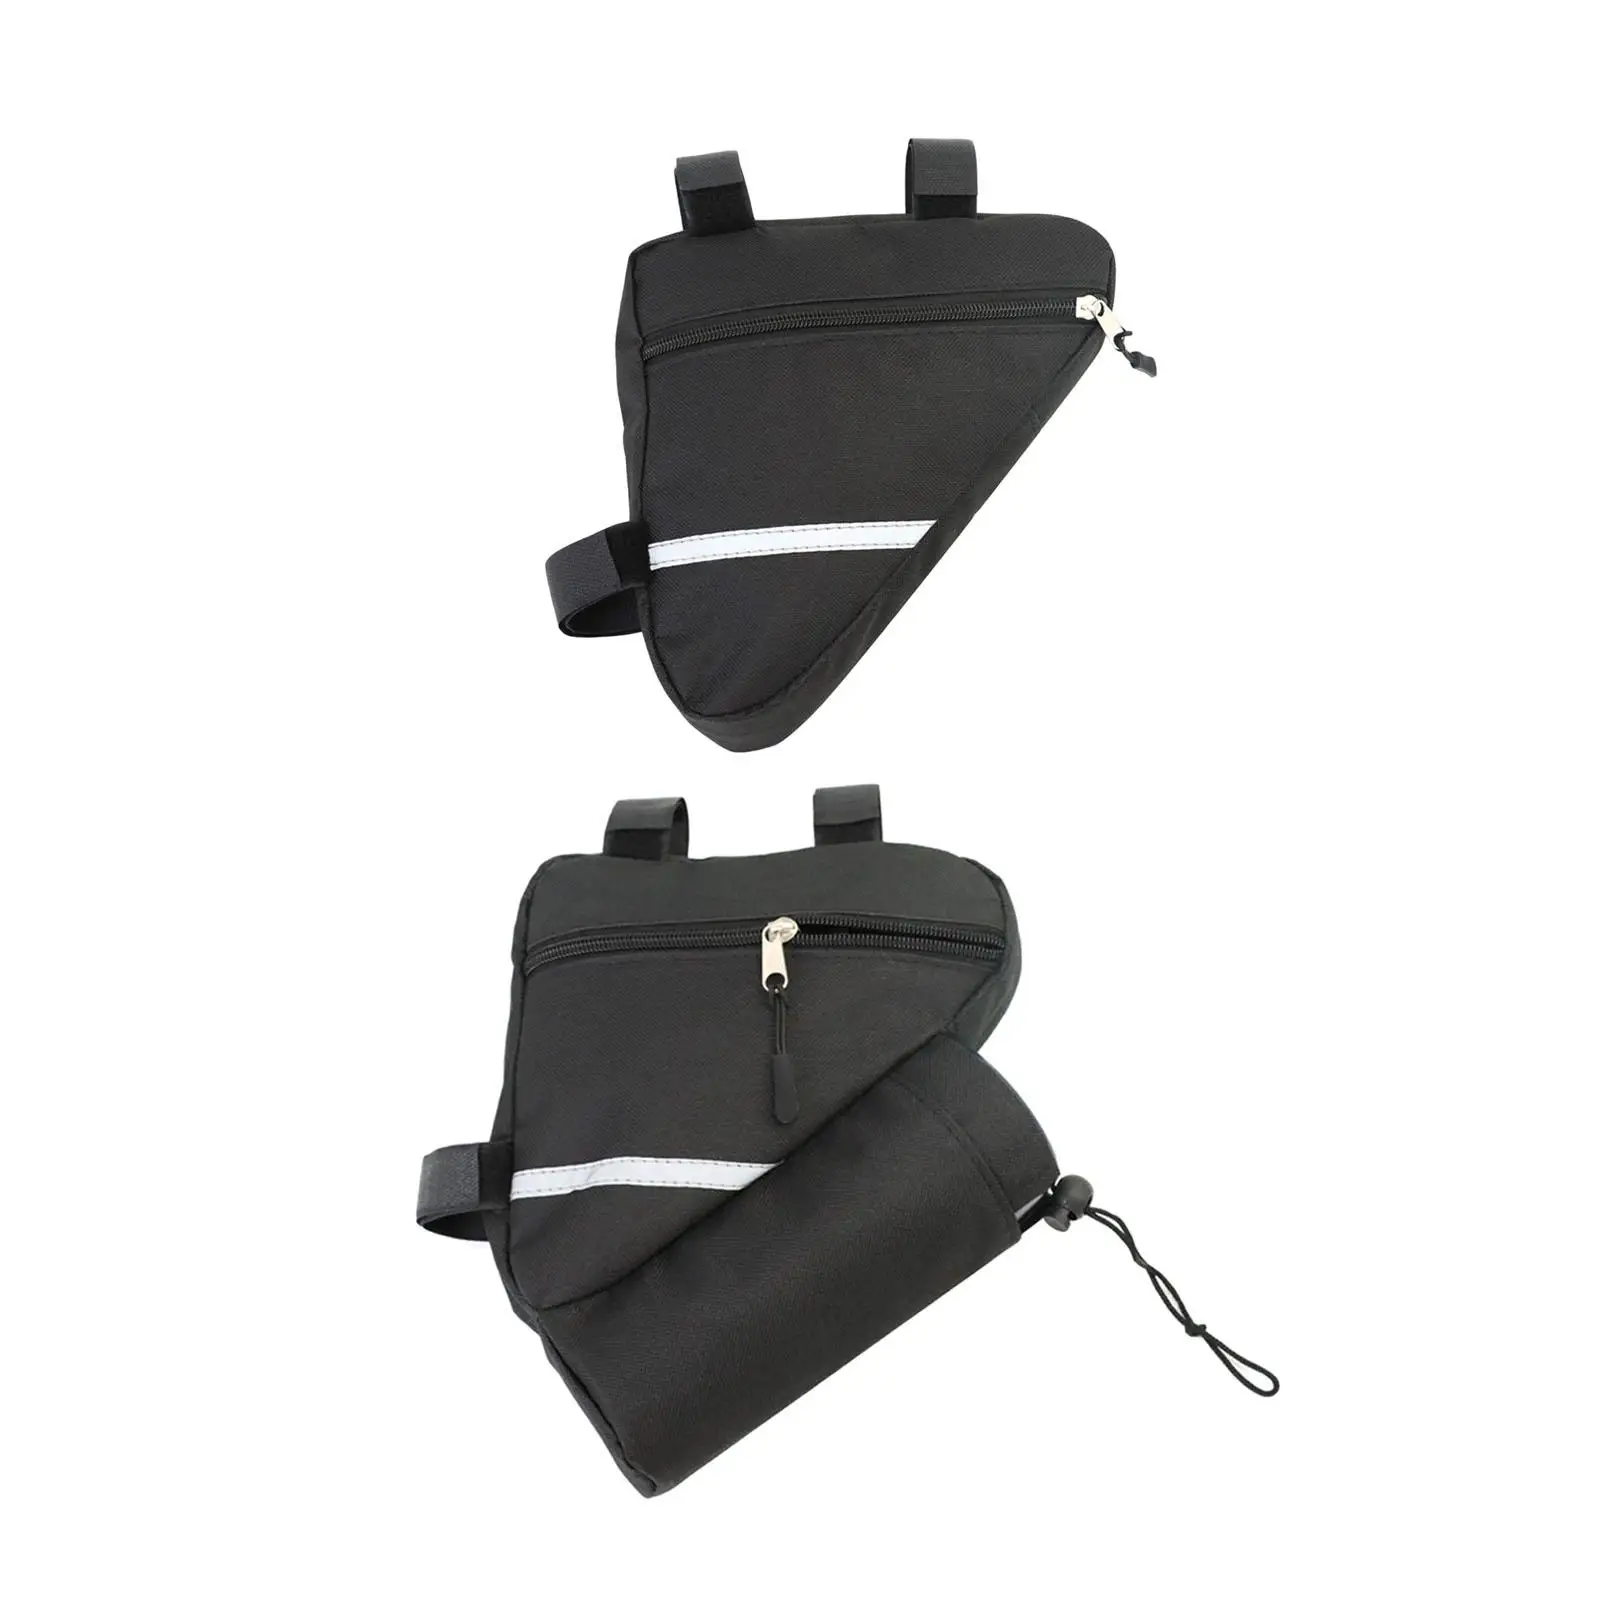 Bike Frame Bag Cycling Bicycle Pouch Accessories Saddle Bag Connects Frame Equipment Tube Pouch for Keys Outdoor Activities